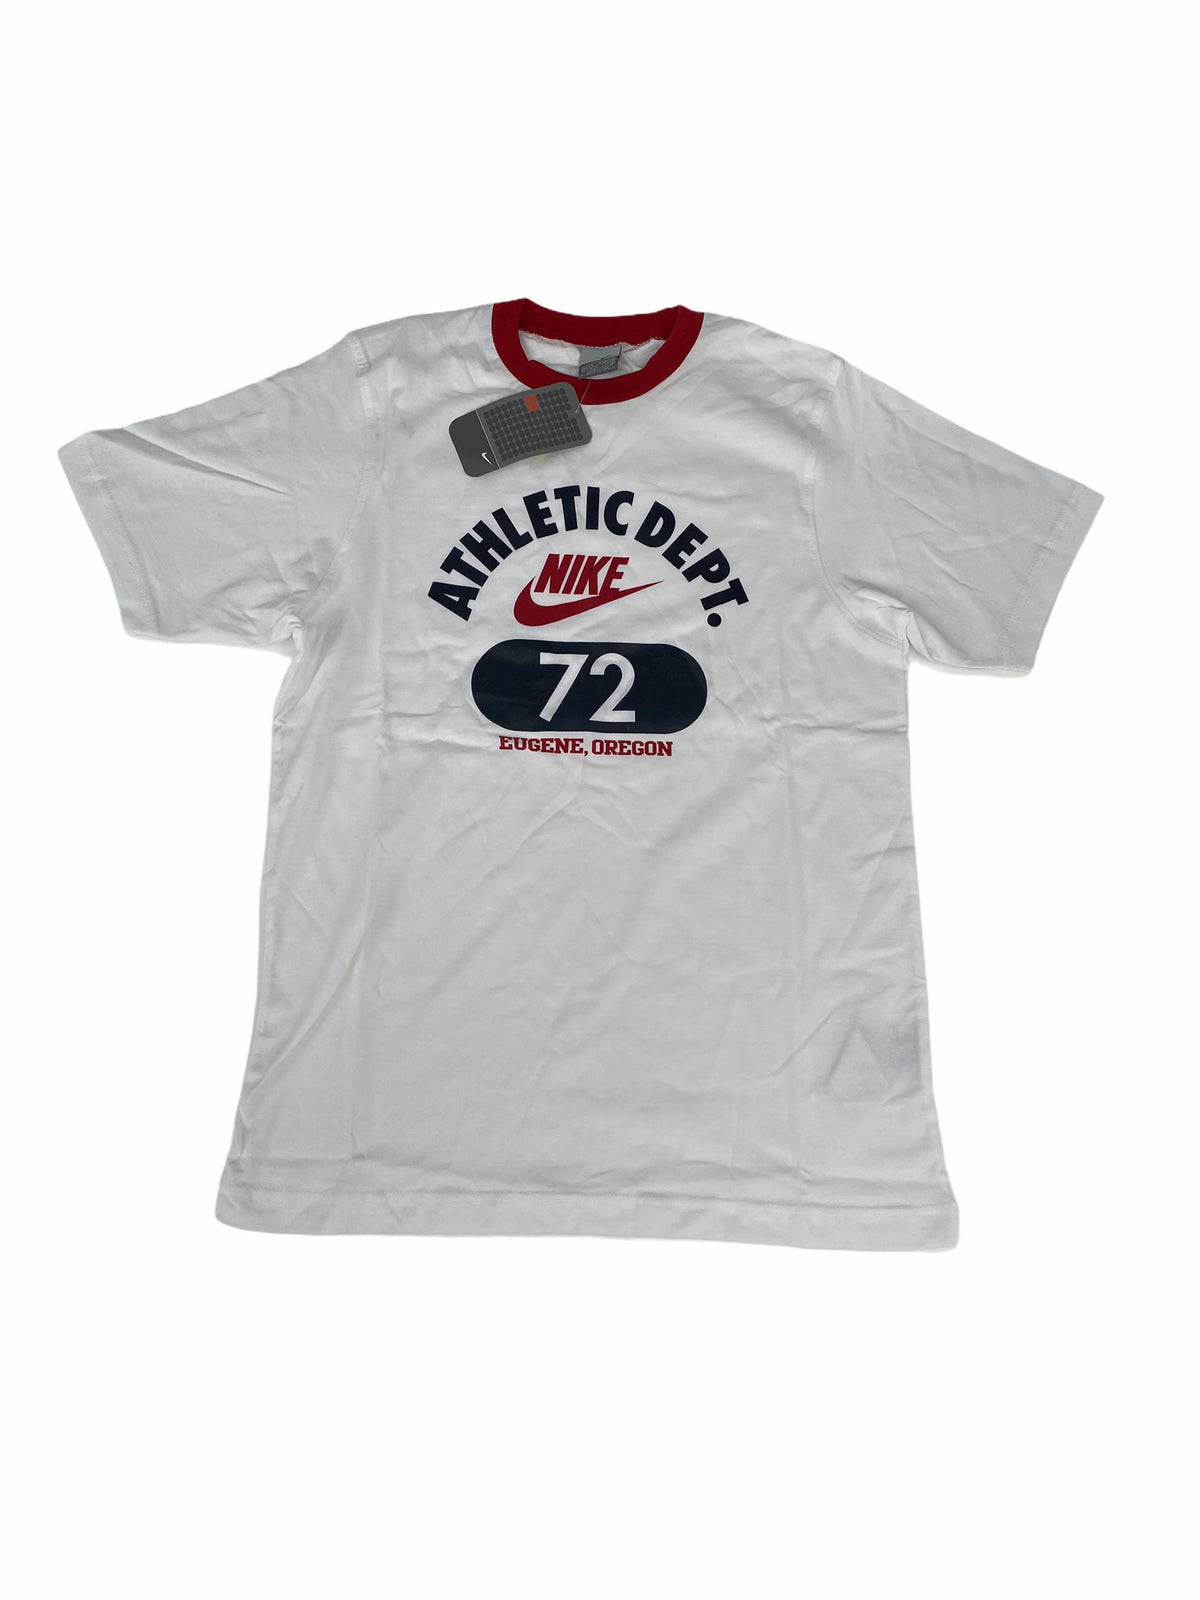 VINTAGE 2003 NIKE ATHLETIC 72 GRAPHIC T-SHIRT - Not In Your Wardrobe™ - [Vendor]